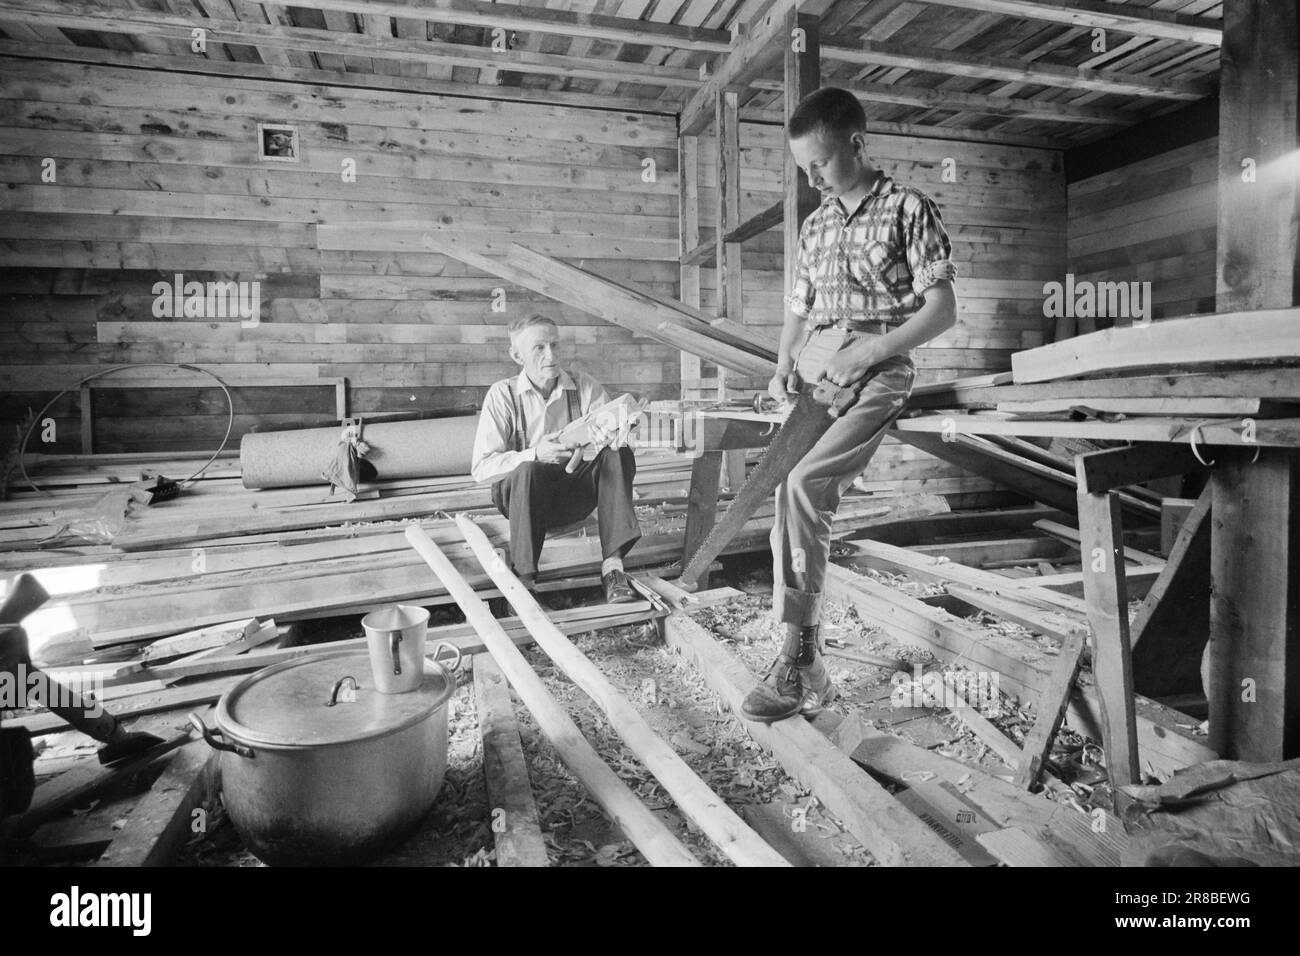 Actual 28-9-1960 : Farmer Farmer at 15 Visiting the country's youngest farmer, Kjell Løftingsbakken.  Both Kjell and his father are carpenters and joiners. They have just built a new wing on the farmhouse and are now running and paneling the walls. The new wing will, among other things, contain bathroom.  Photo: Sverre A. Børretzen / Aktuell / NTB ***PHOTO NOT IMAGE PROCESSED*** Stock Photo